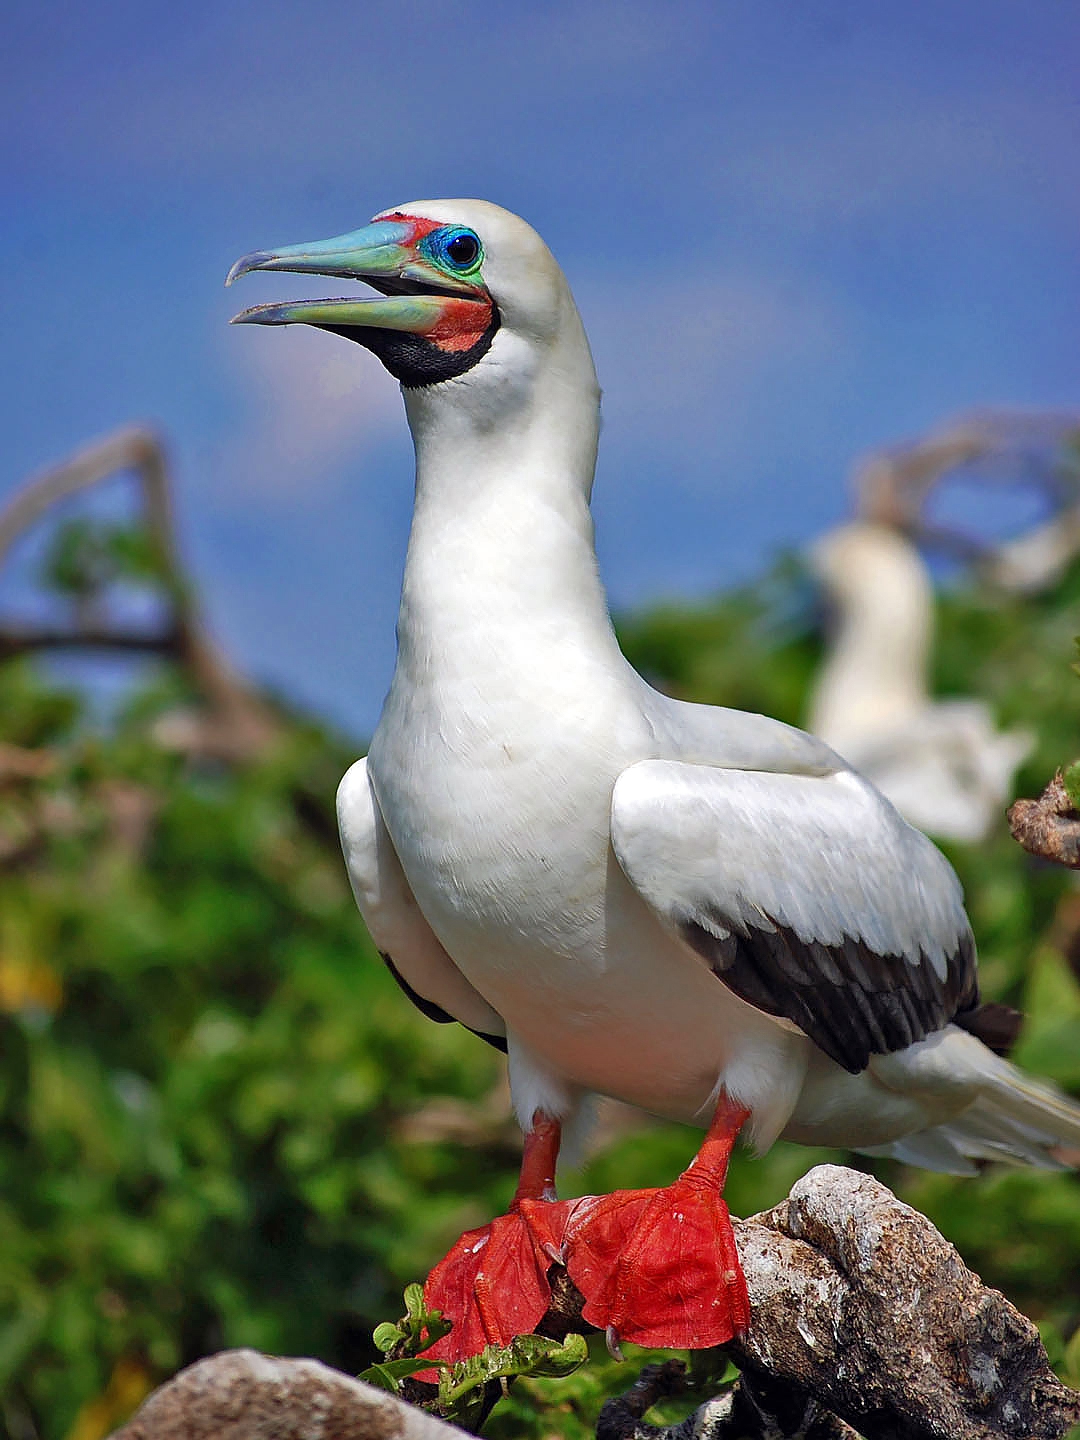 The Red-footed Booby (Sula sula rubripes).